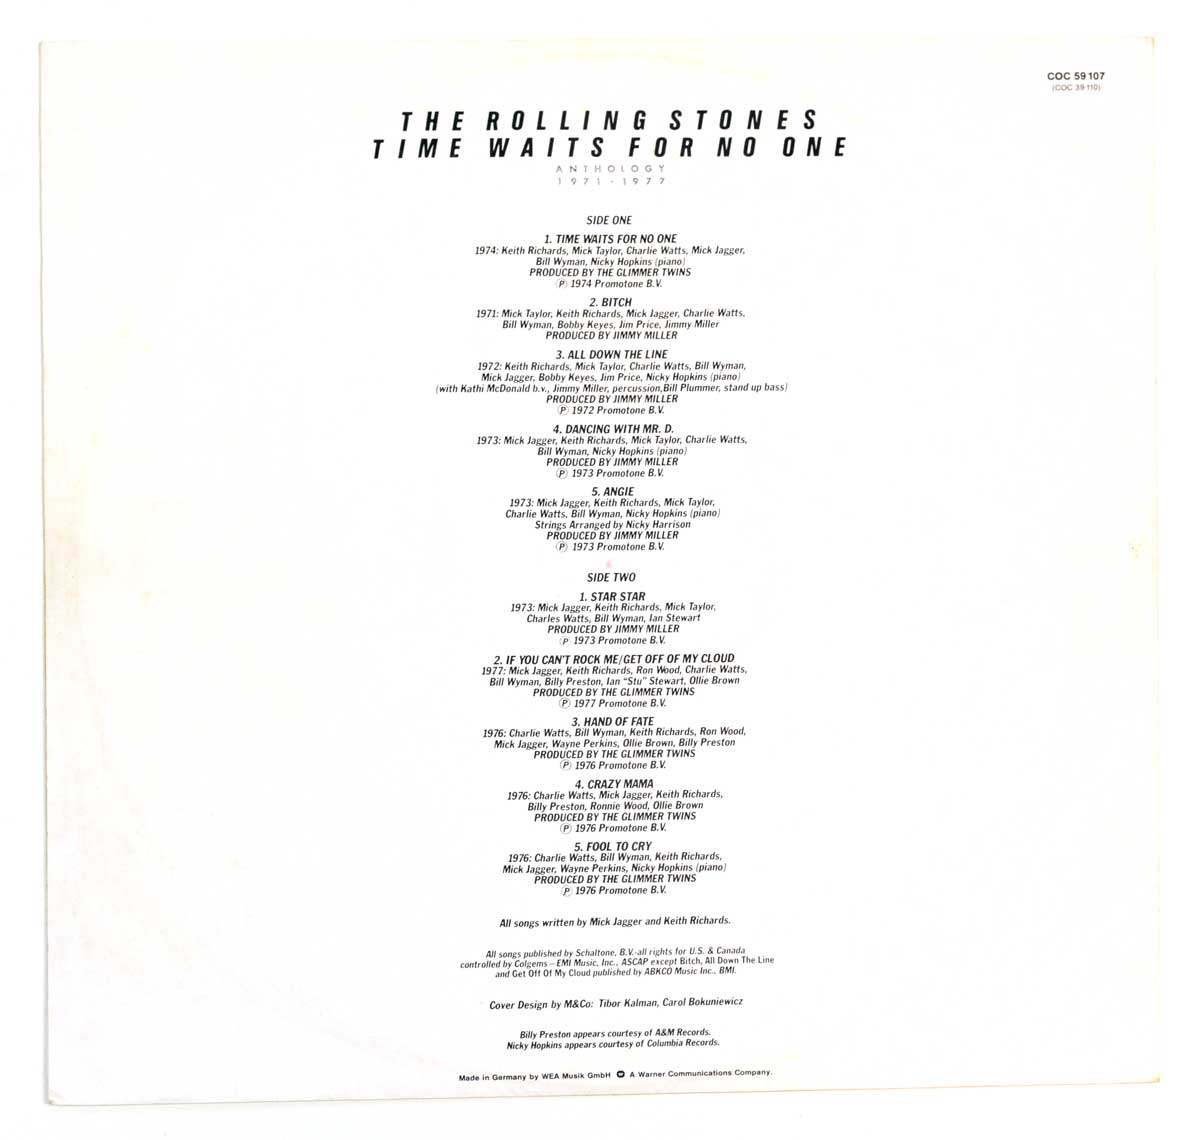 Inner Sleeve   of "ROLLING STONES Time Waits For No One (Anthology 1971-1977)" Album